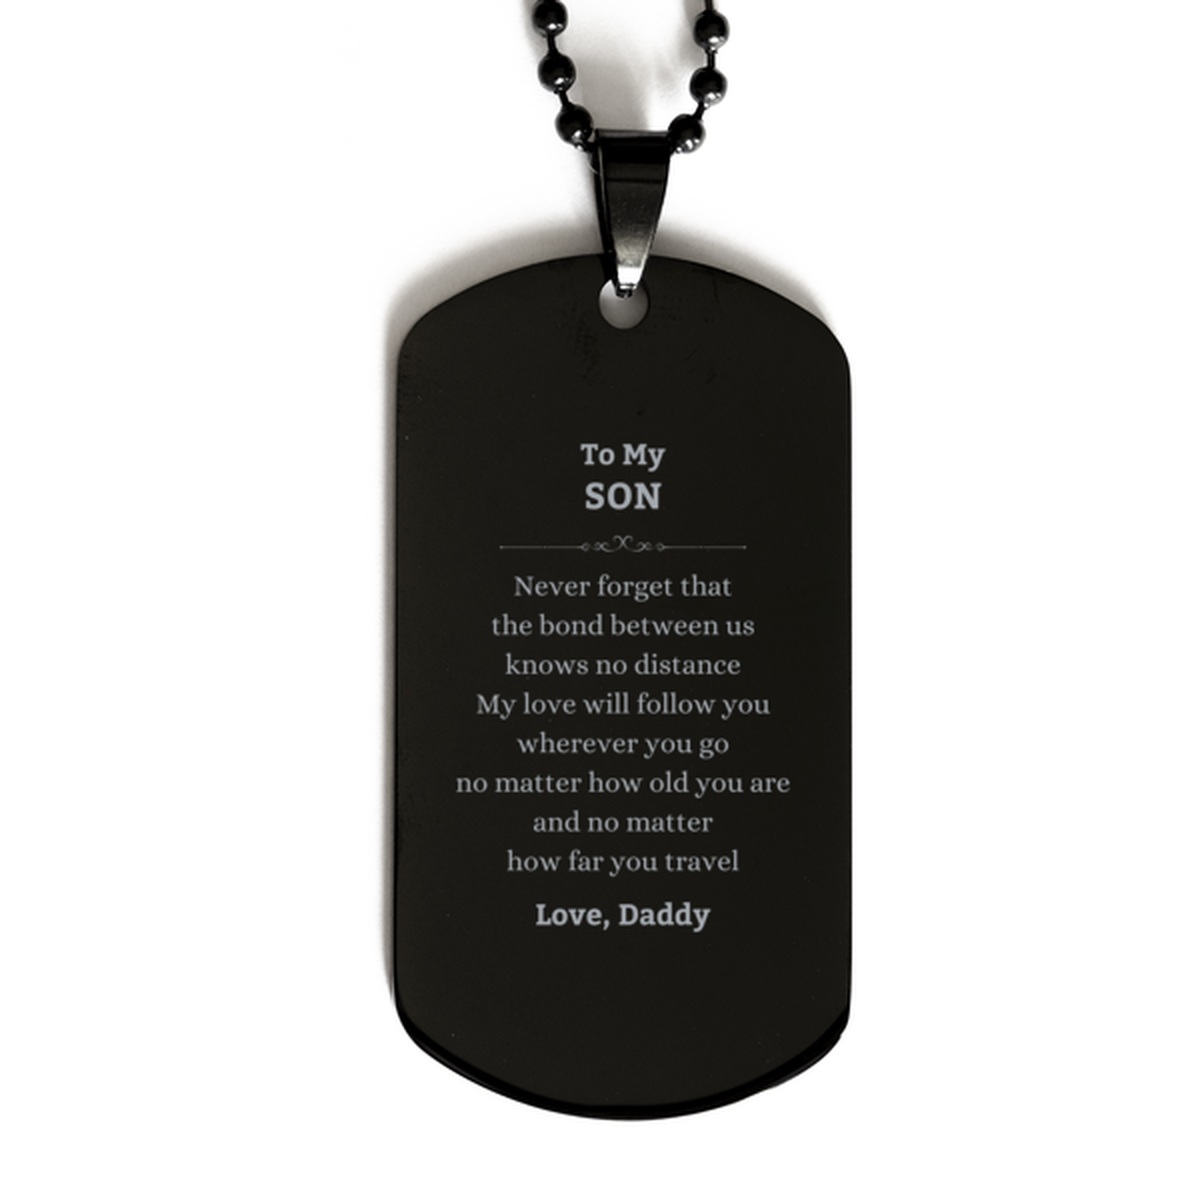 Son Birthday Gifts from Daddy, Adjustable Black Dog Tag for Son Christmas Graduation Unique Gifts Son Never forget that the bond between us knows no distance. Love, Daddy